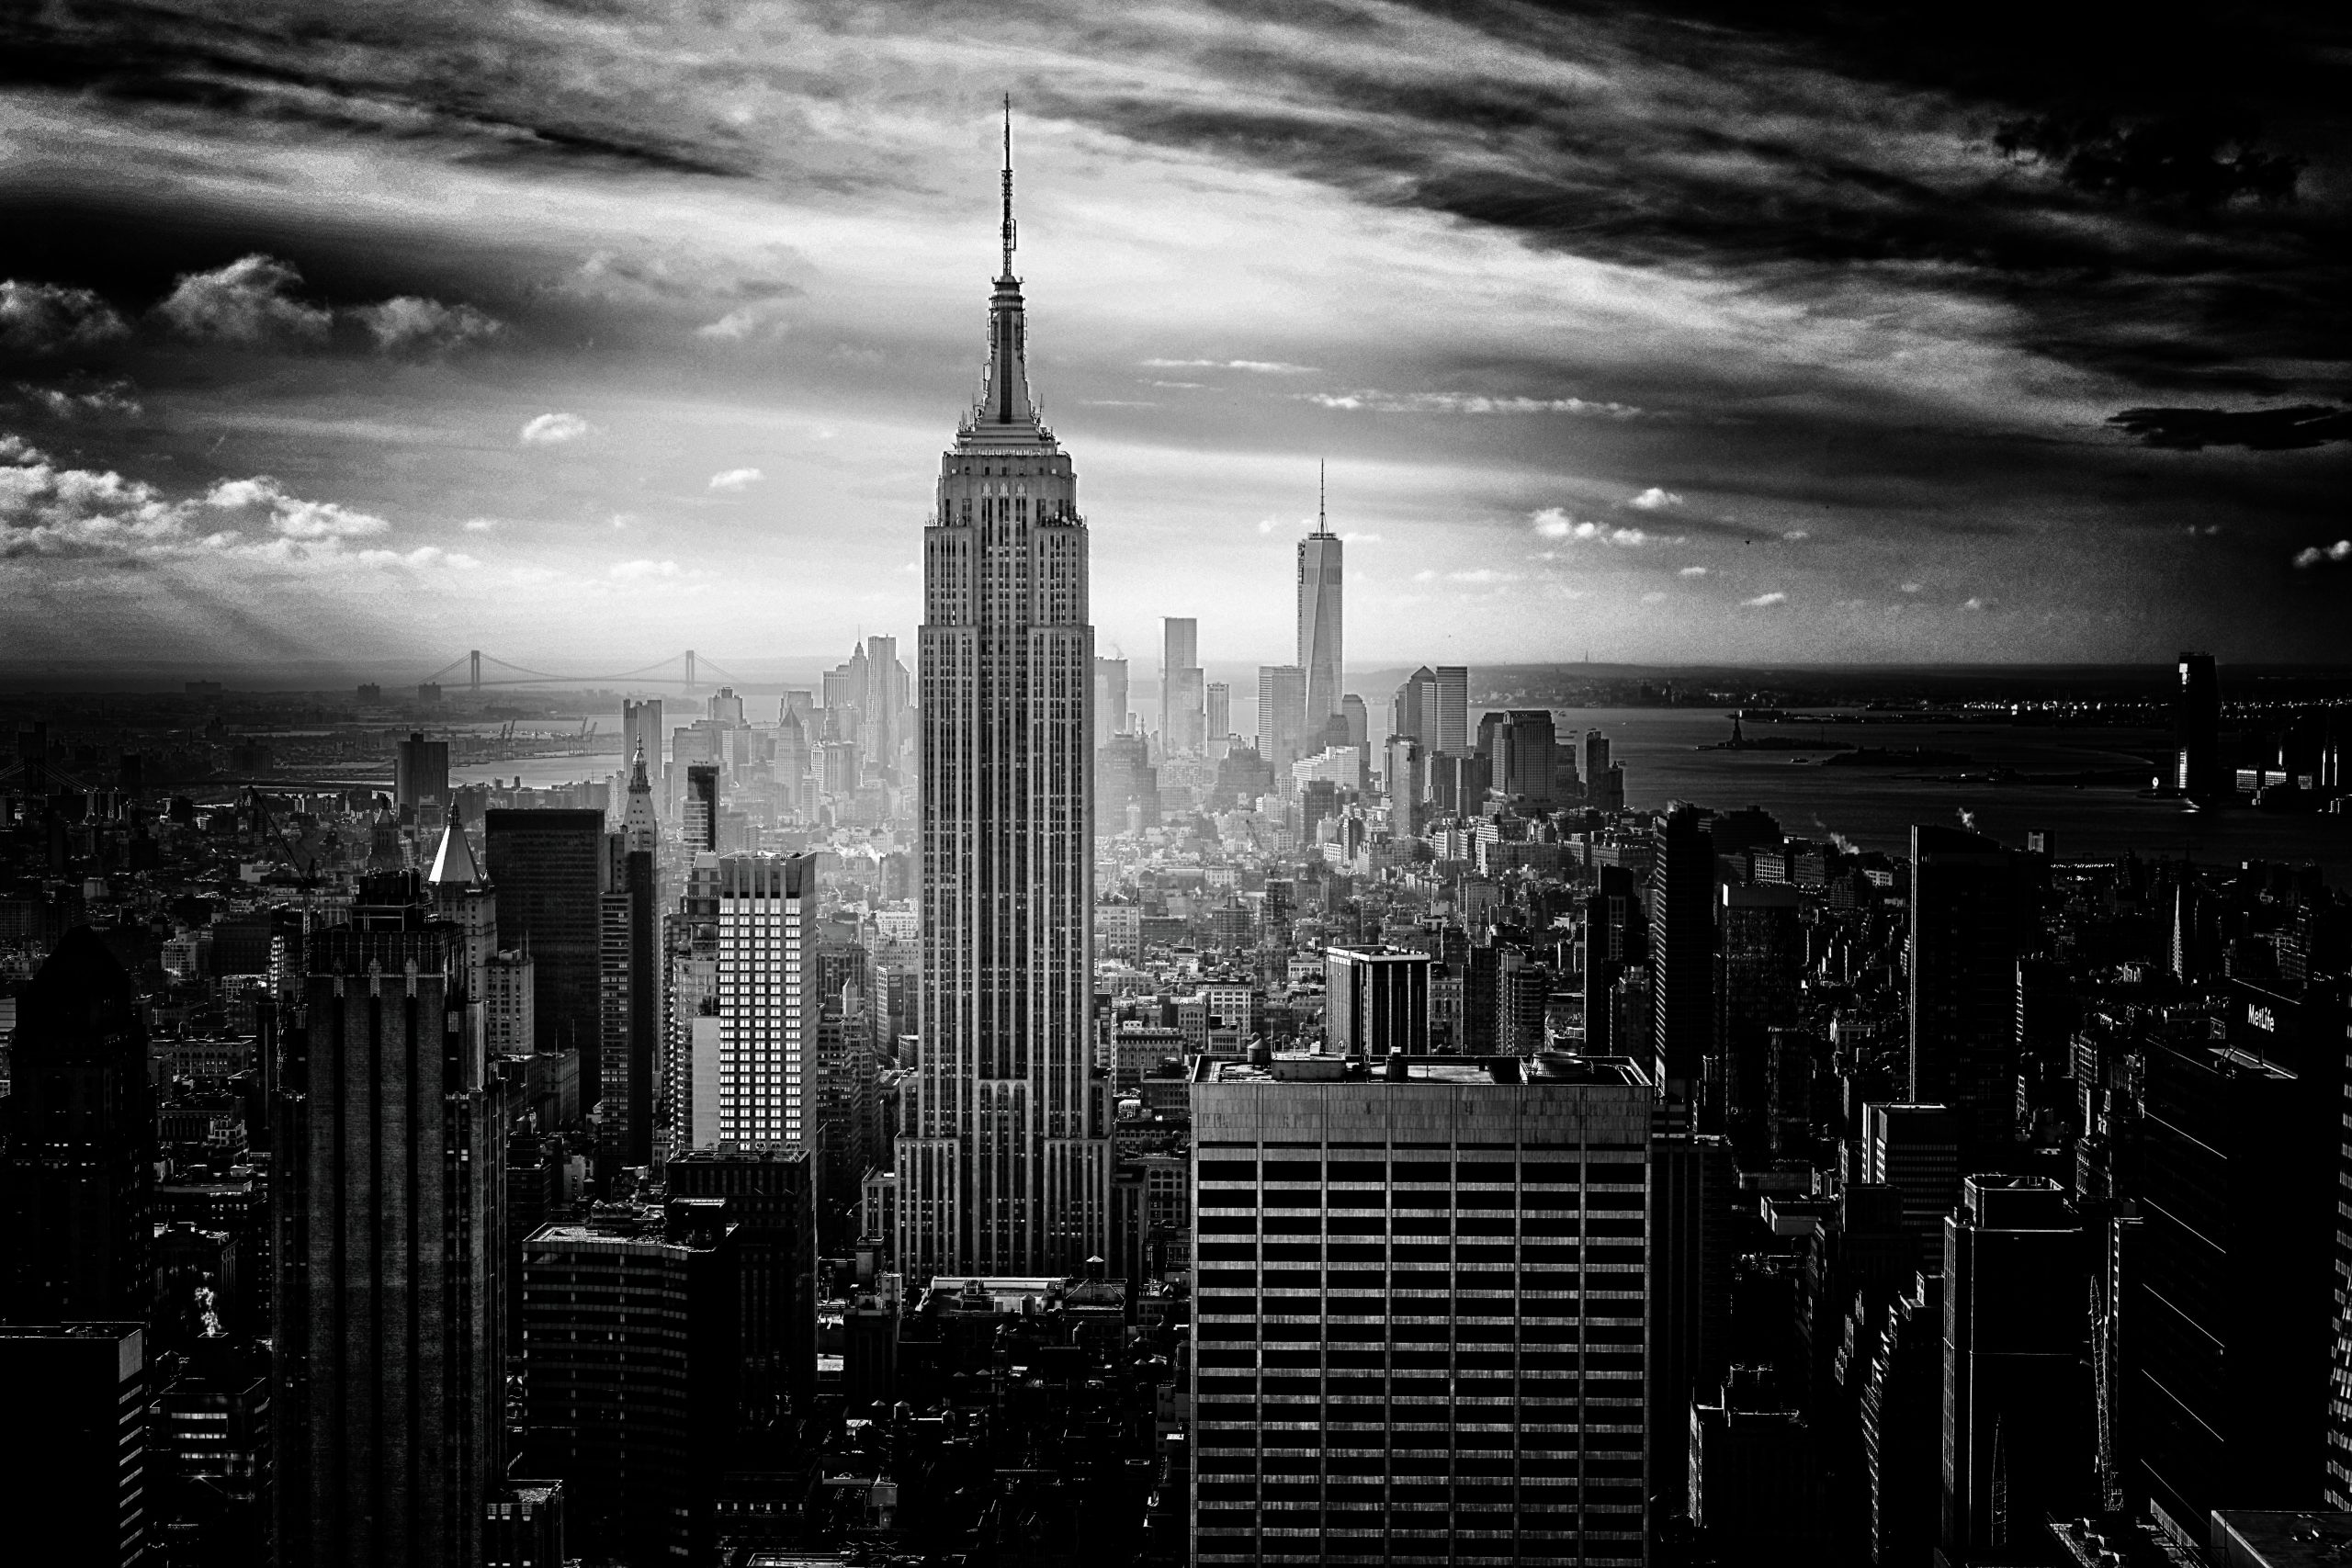 A black-and-white photograph cityscape of New York, centering on the Empire State Building, with dramatic cloulds above.